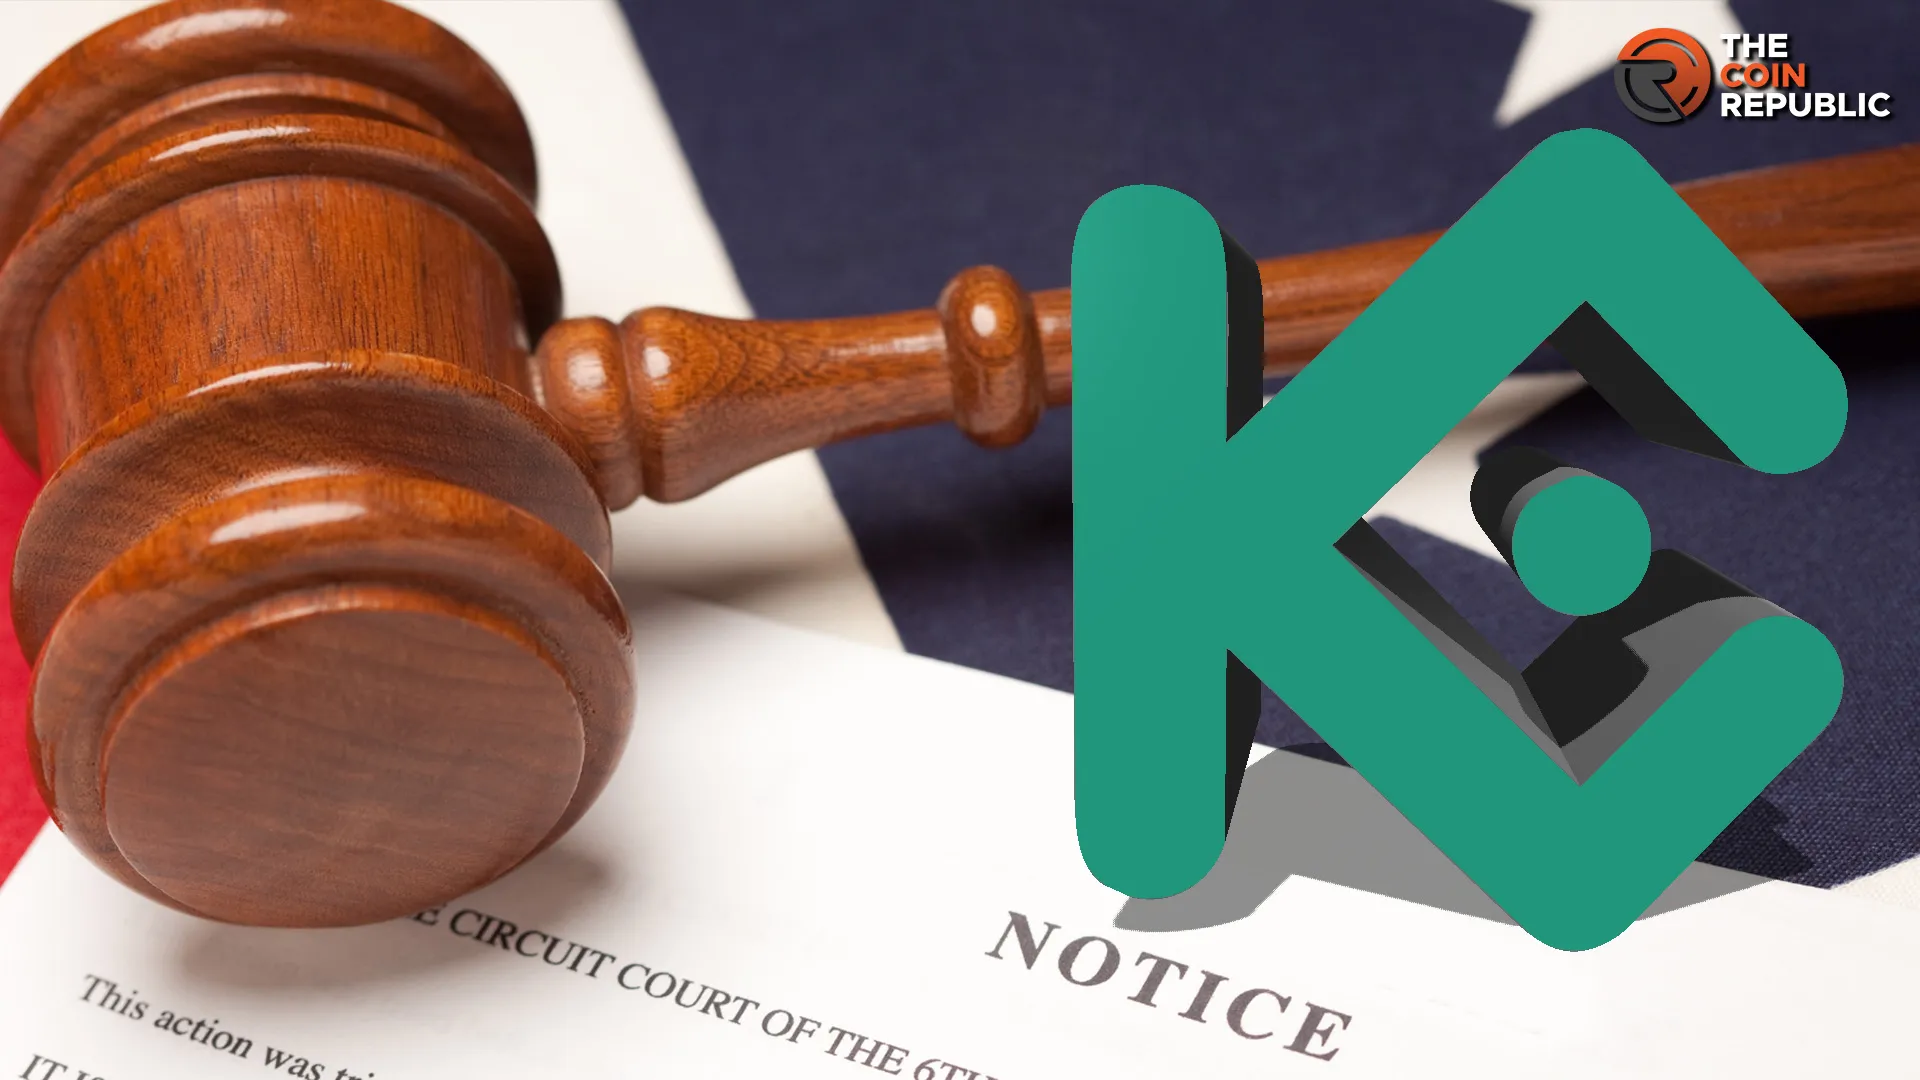 KuCoin Vs Government: Will KuCoin Founders Be Imprisoned?